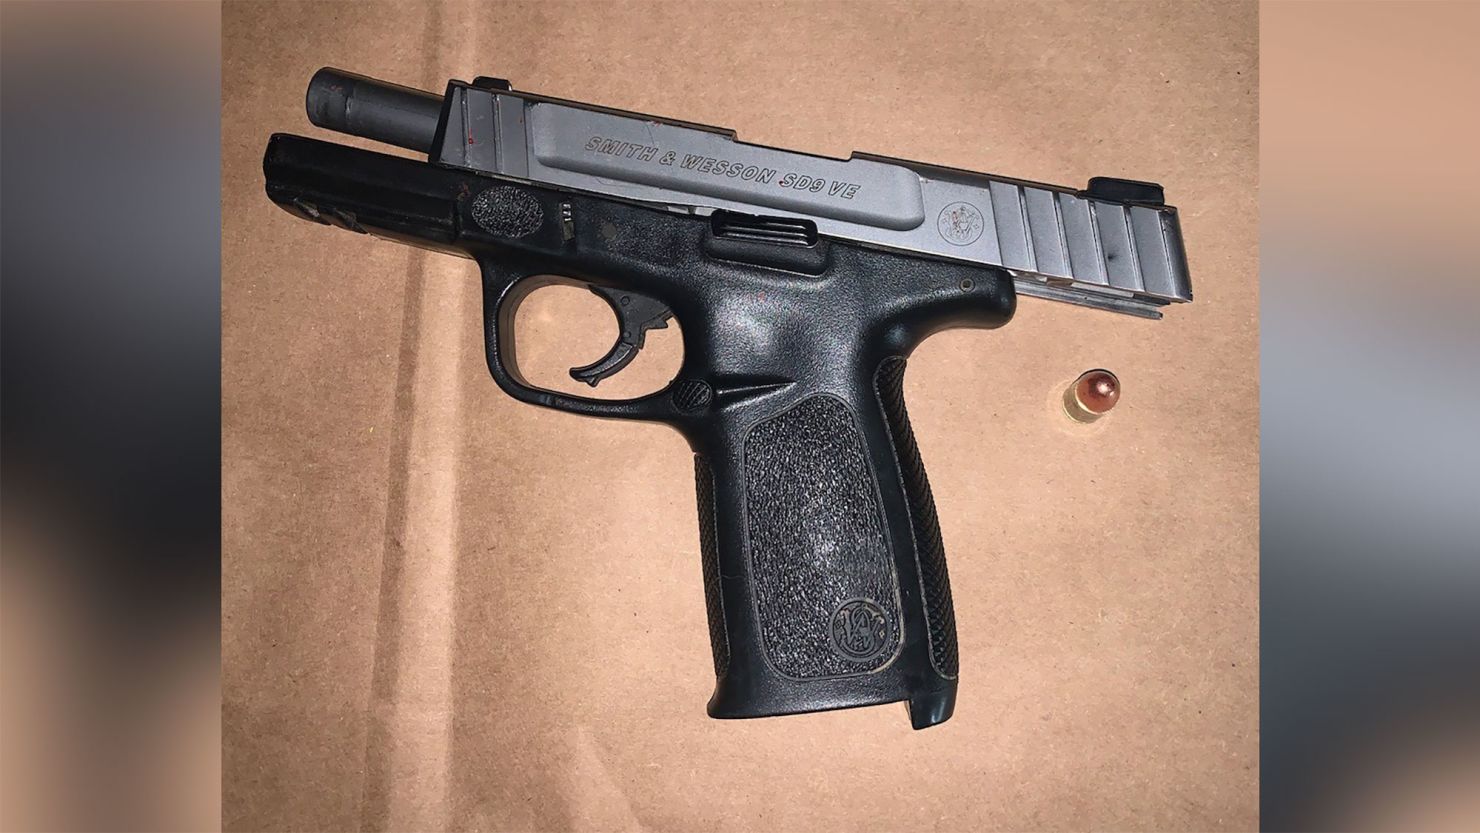 Sacramento Police said this firearm was recovered near the suspect.